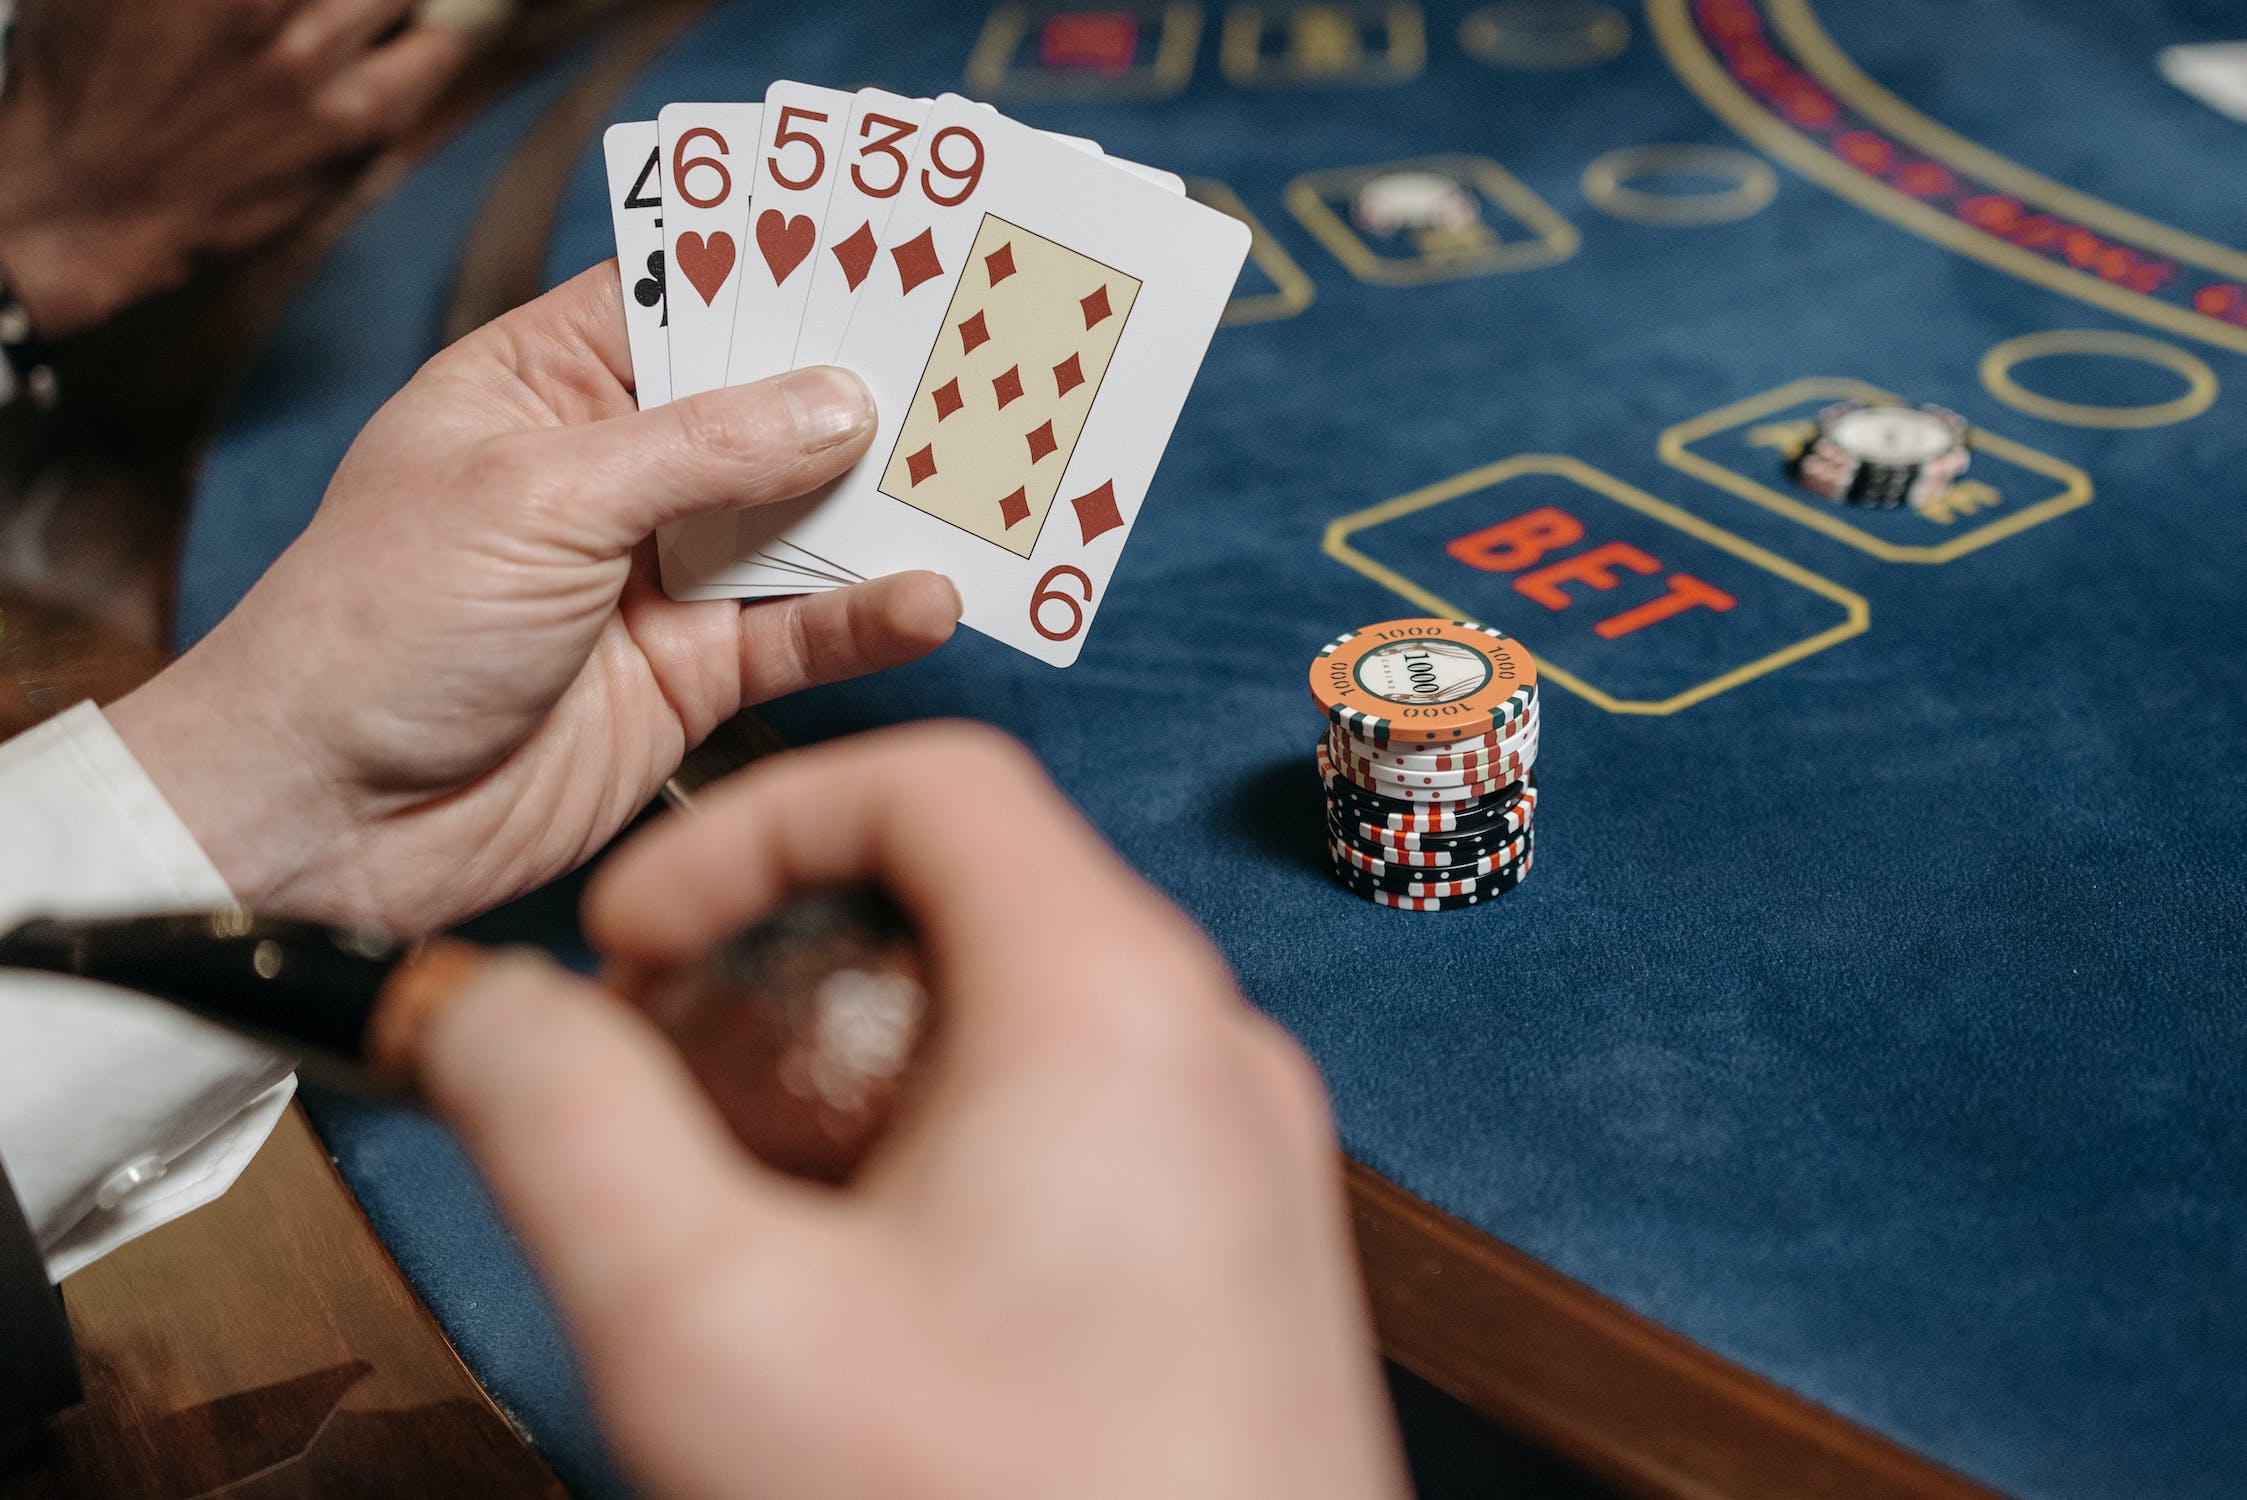 Bluffing Brilliance: Expert Tips on When to Hold ‘Em and Fold ‘Em